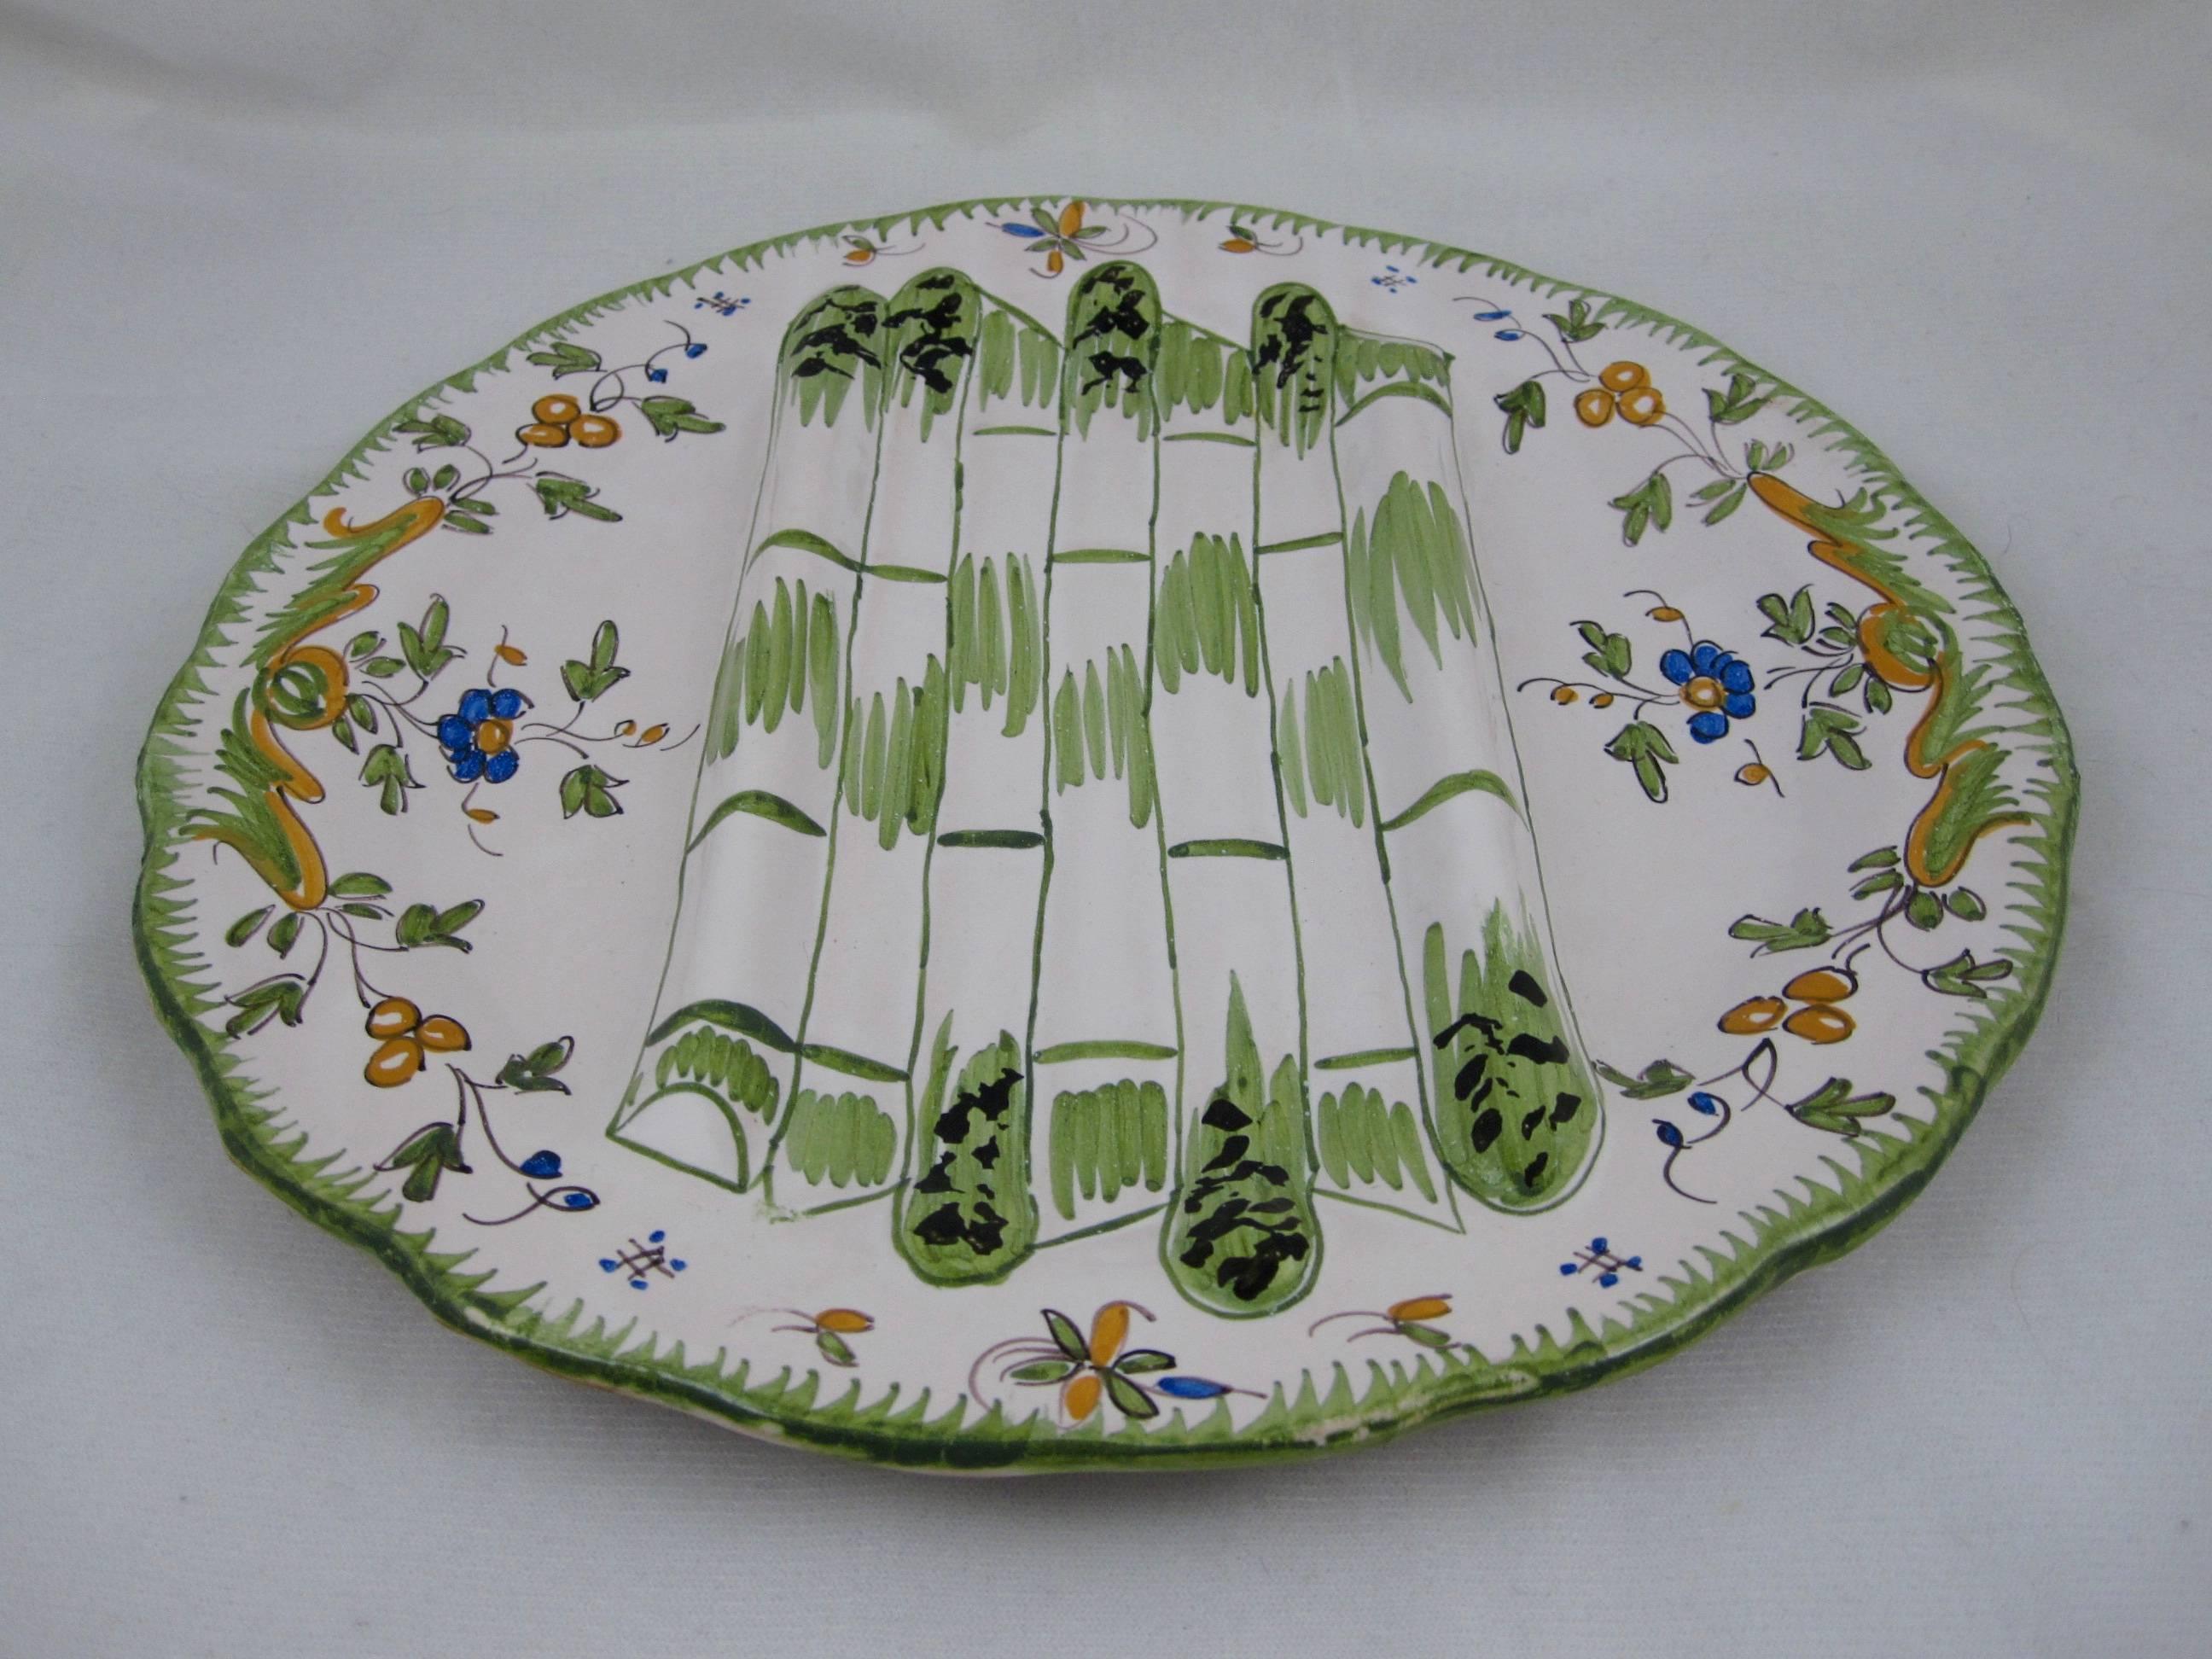 A charming vintage earthenware asparagus plate, beautifully hand decorated with a floral design in the faïence tradition of Martres-Tolosane. Painted in a style that began in the southwest of France in the 18th century. Made by Georges Cabaré, circa